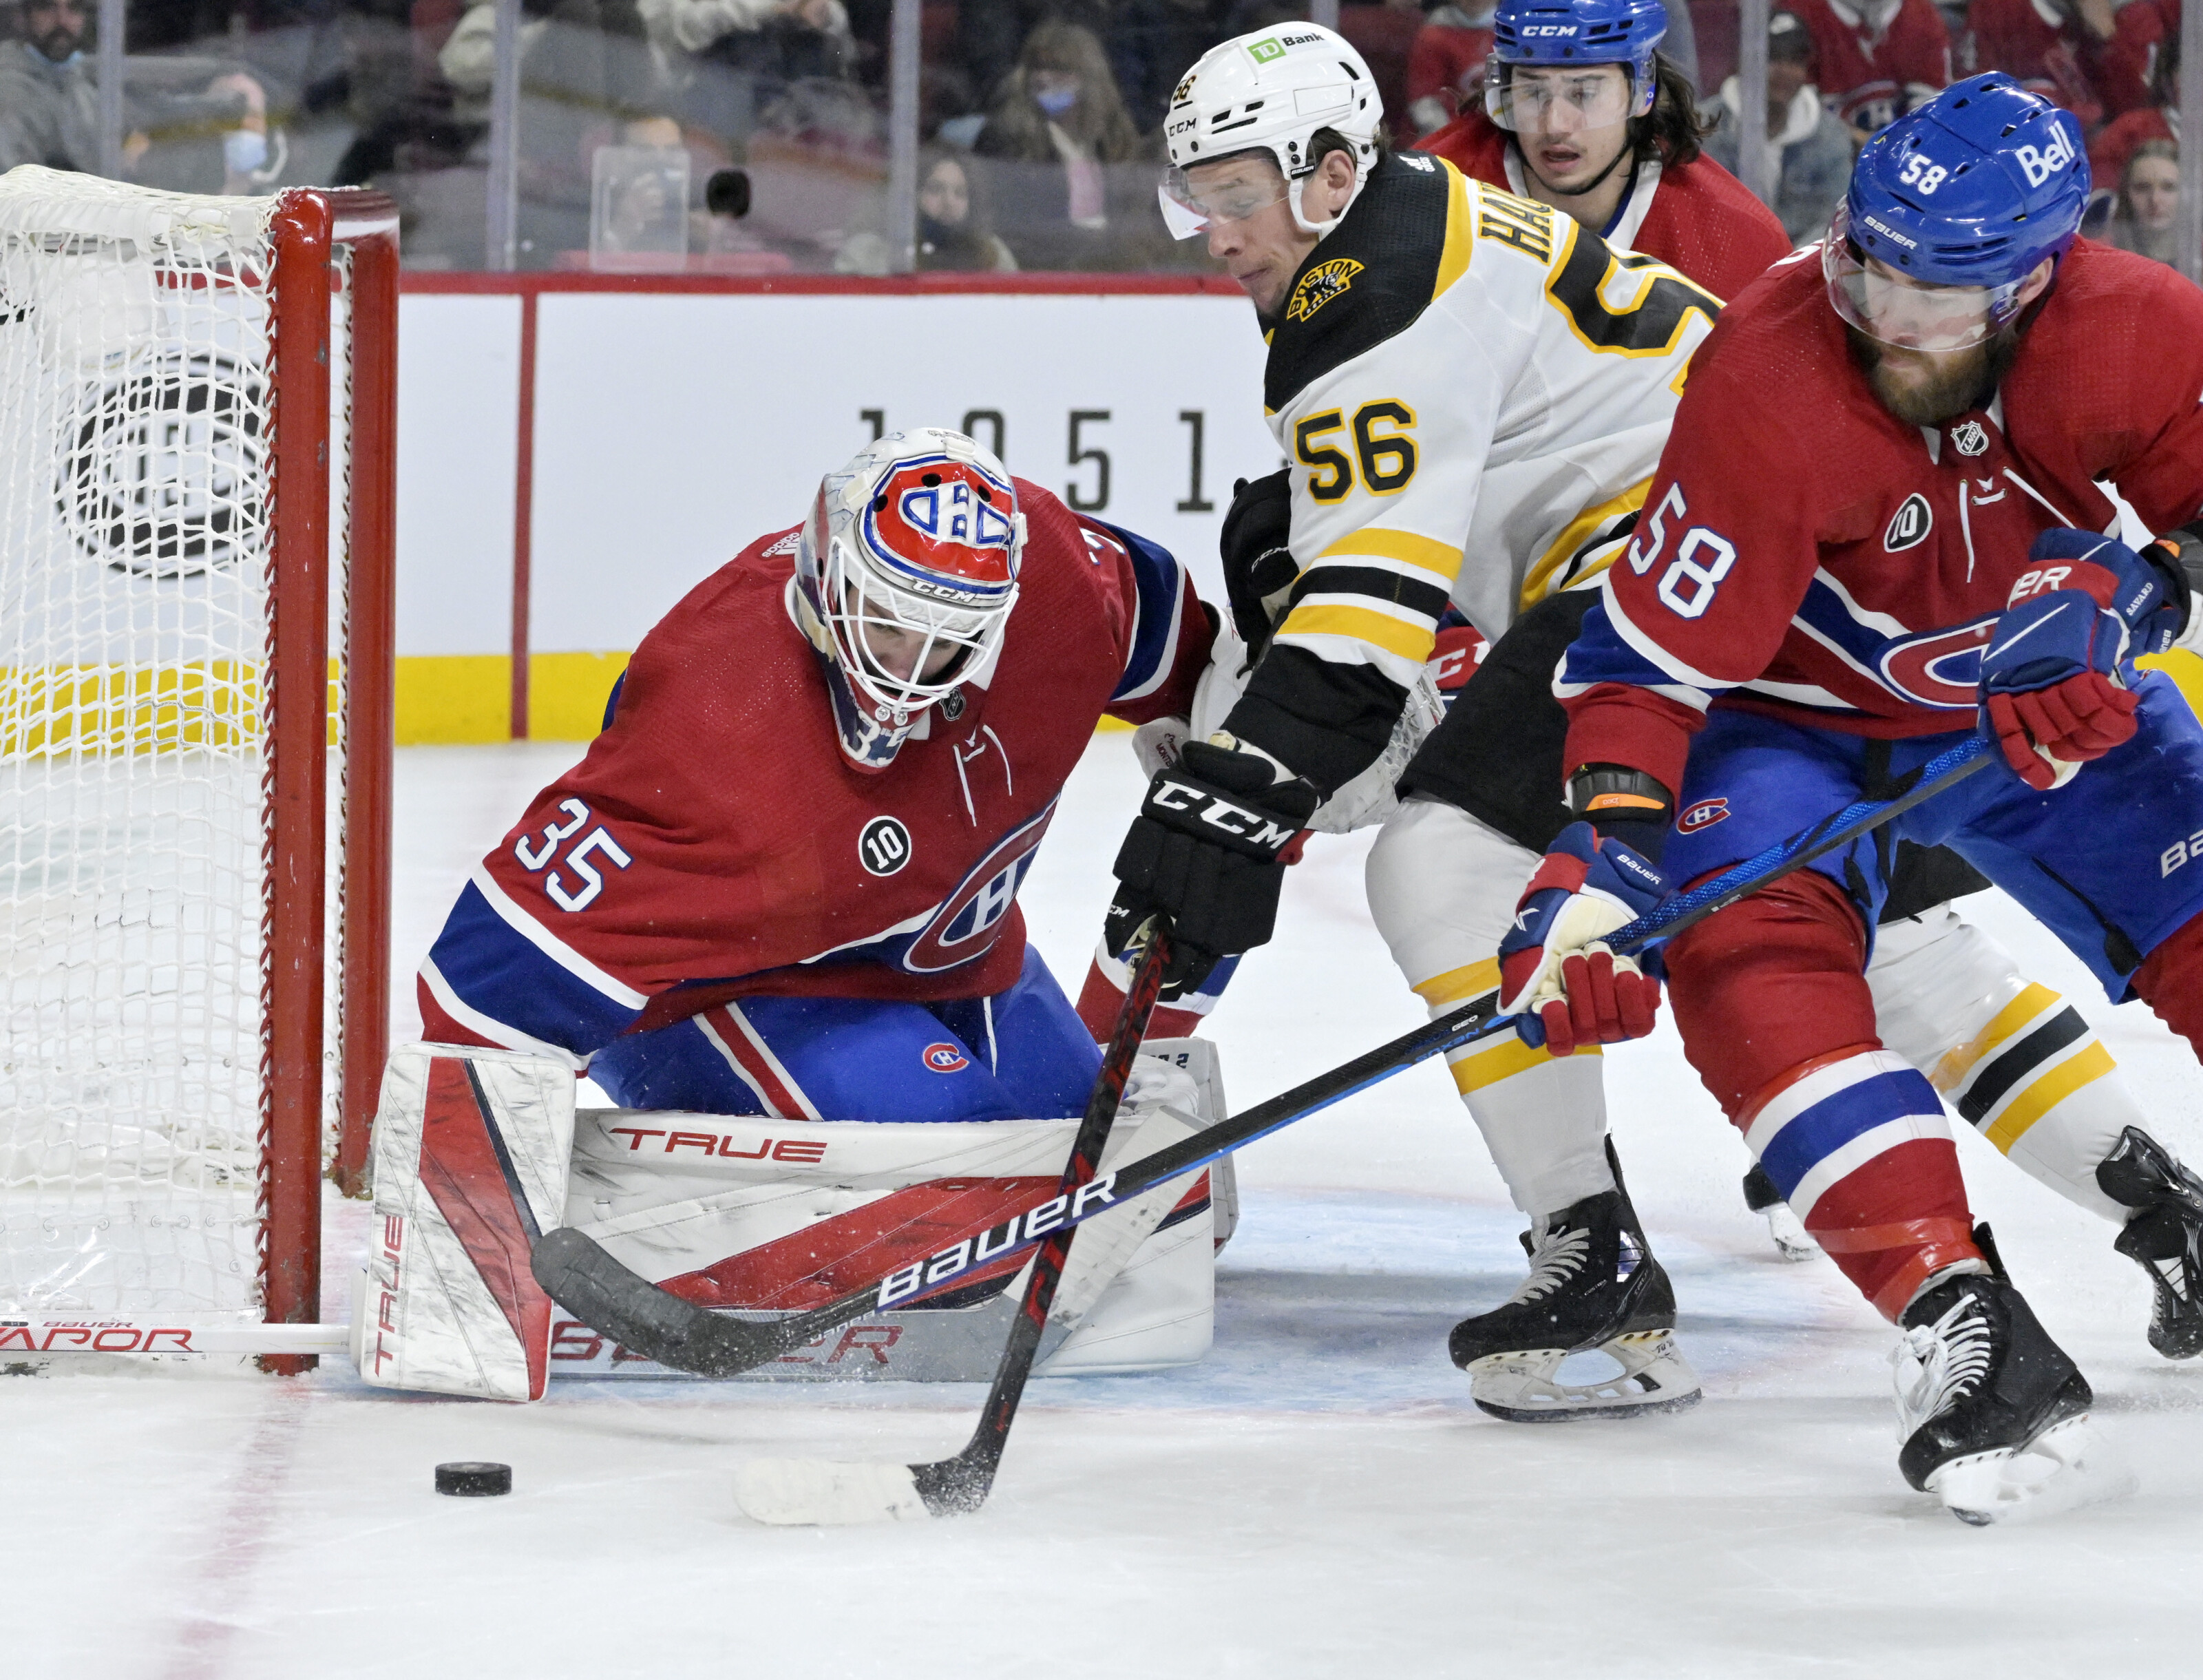 The Bruins and Canadiens Belong on Hockey Night in Canada